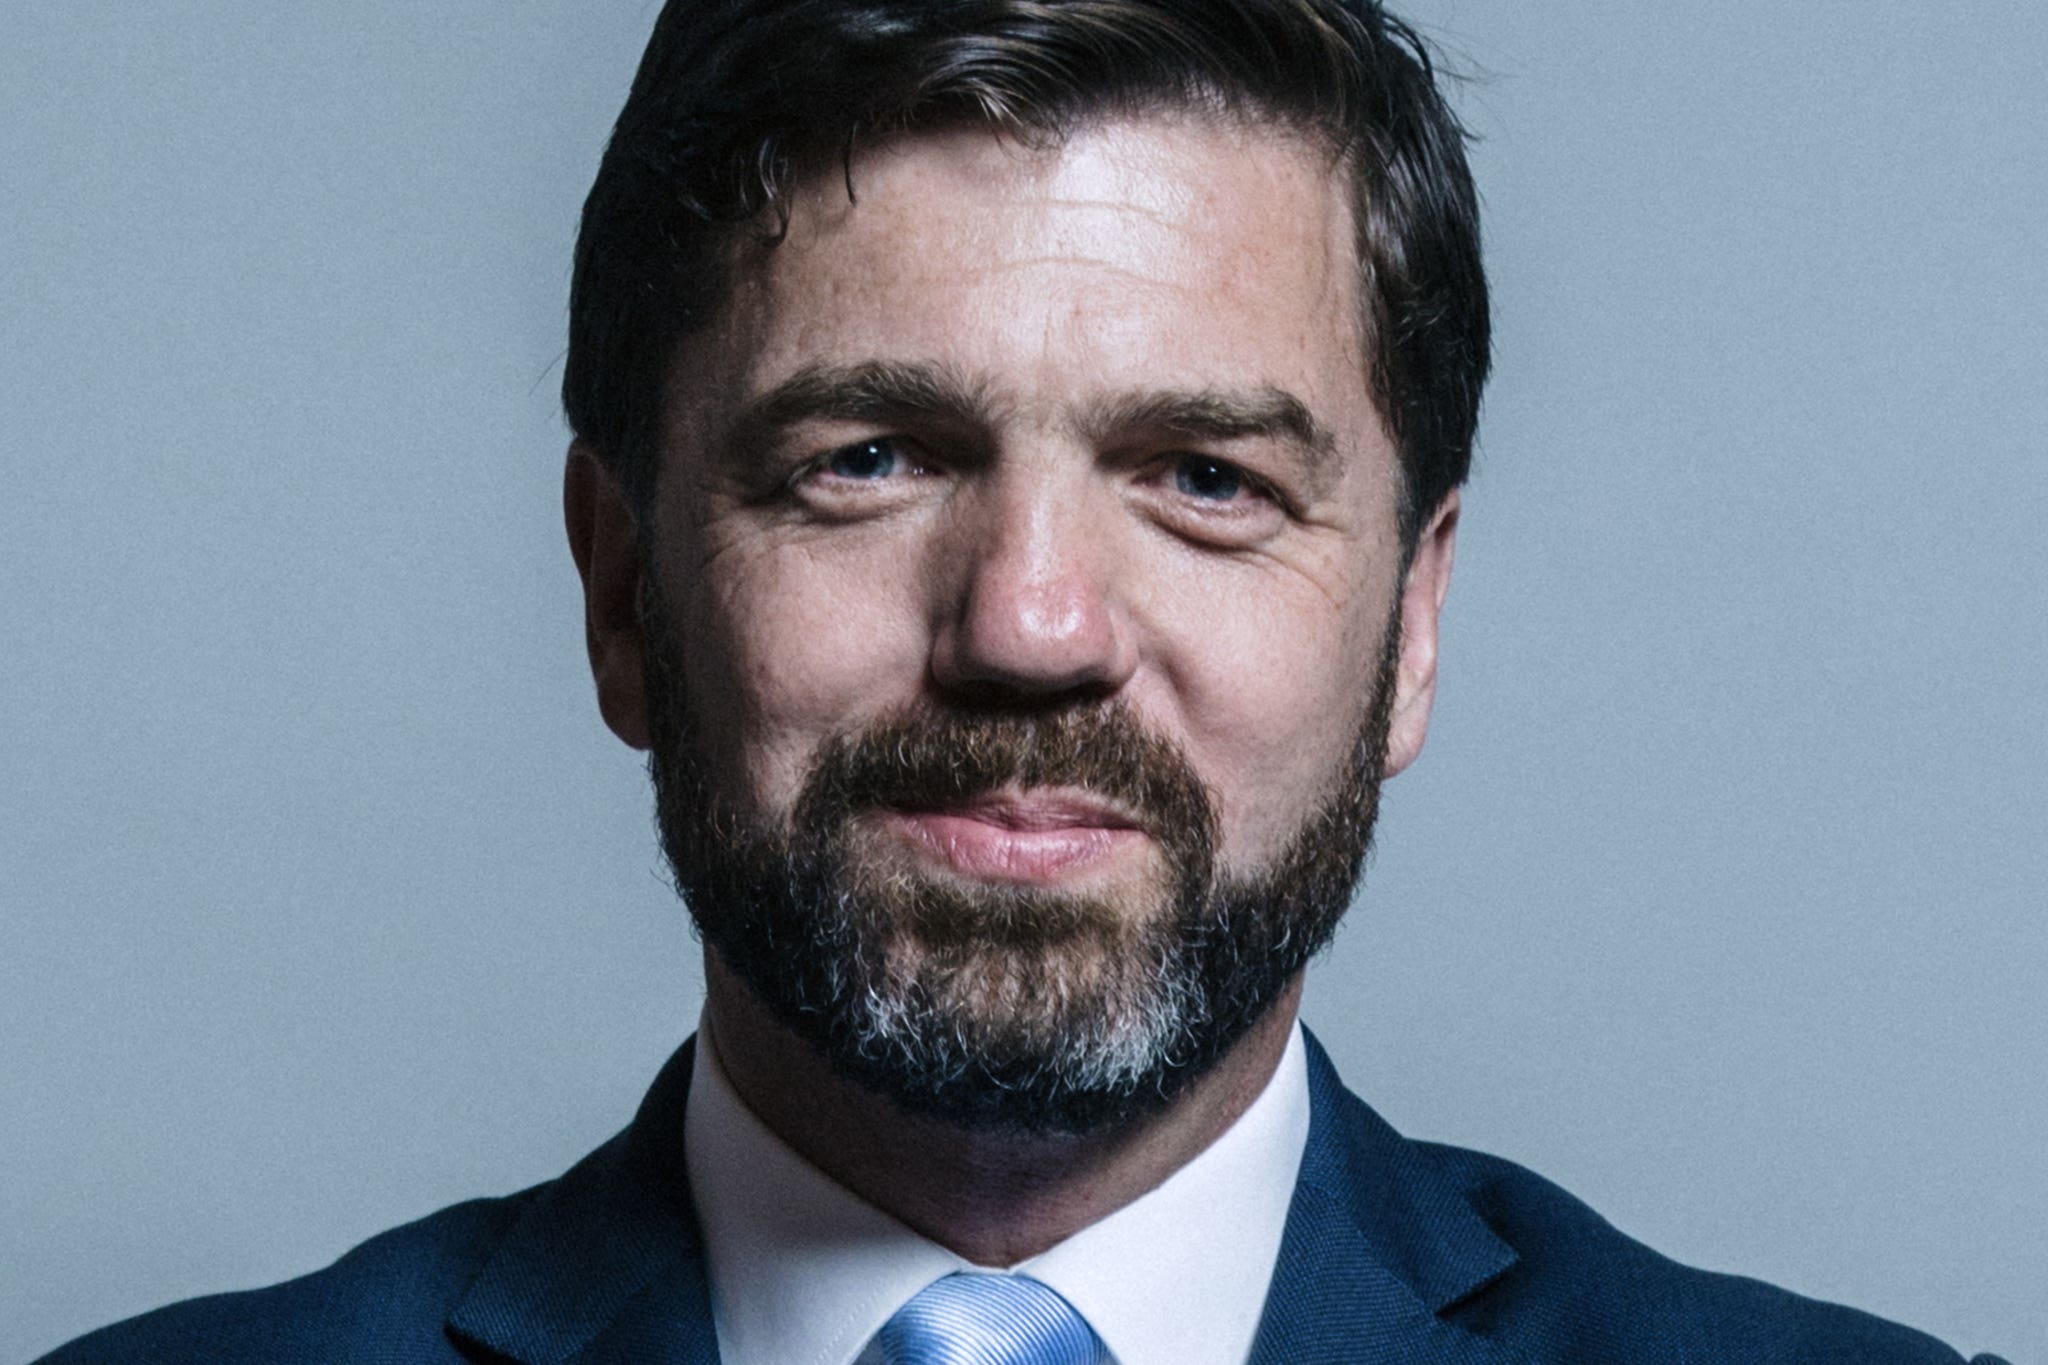 Stephen Crabb served as Wales secretary between 2014 and 2016 (Chris McAndrew/UK Parliament/PA)